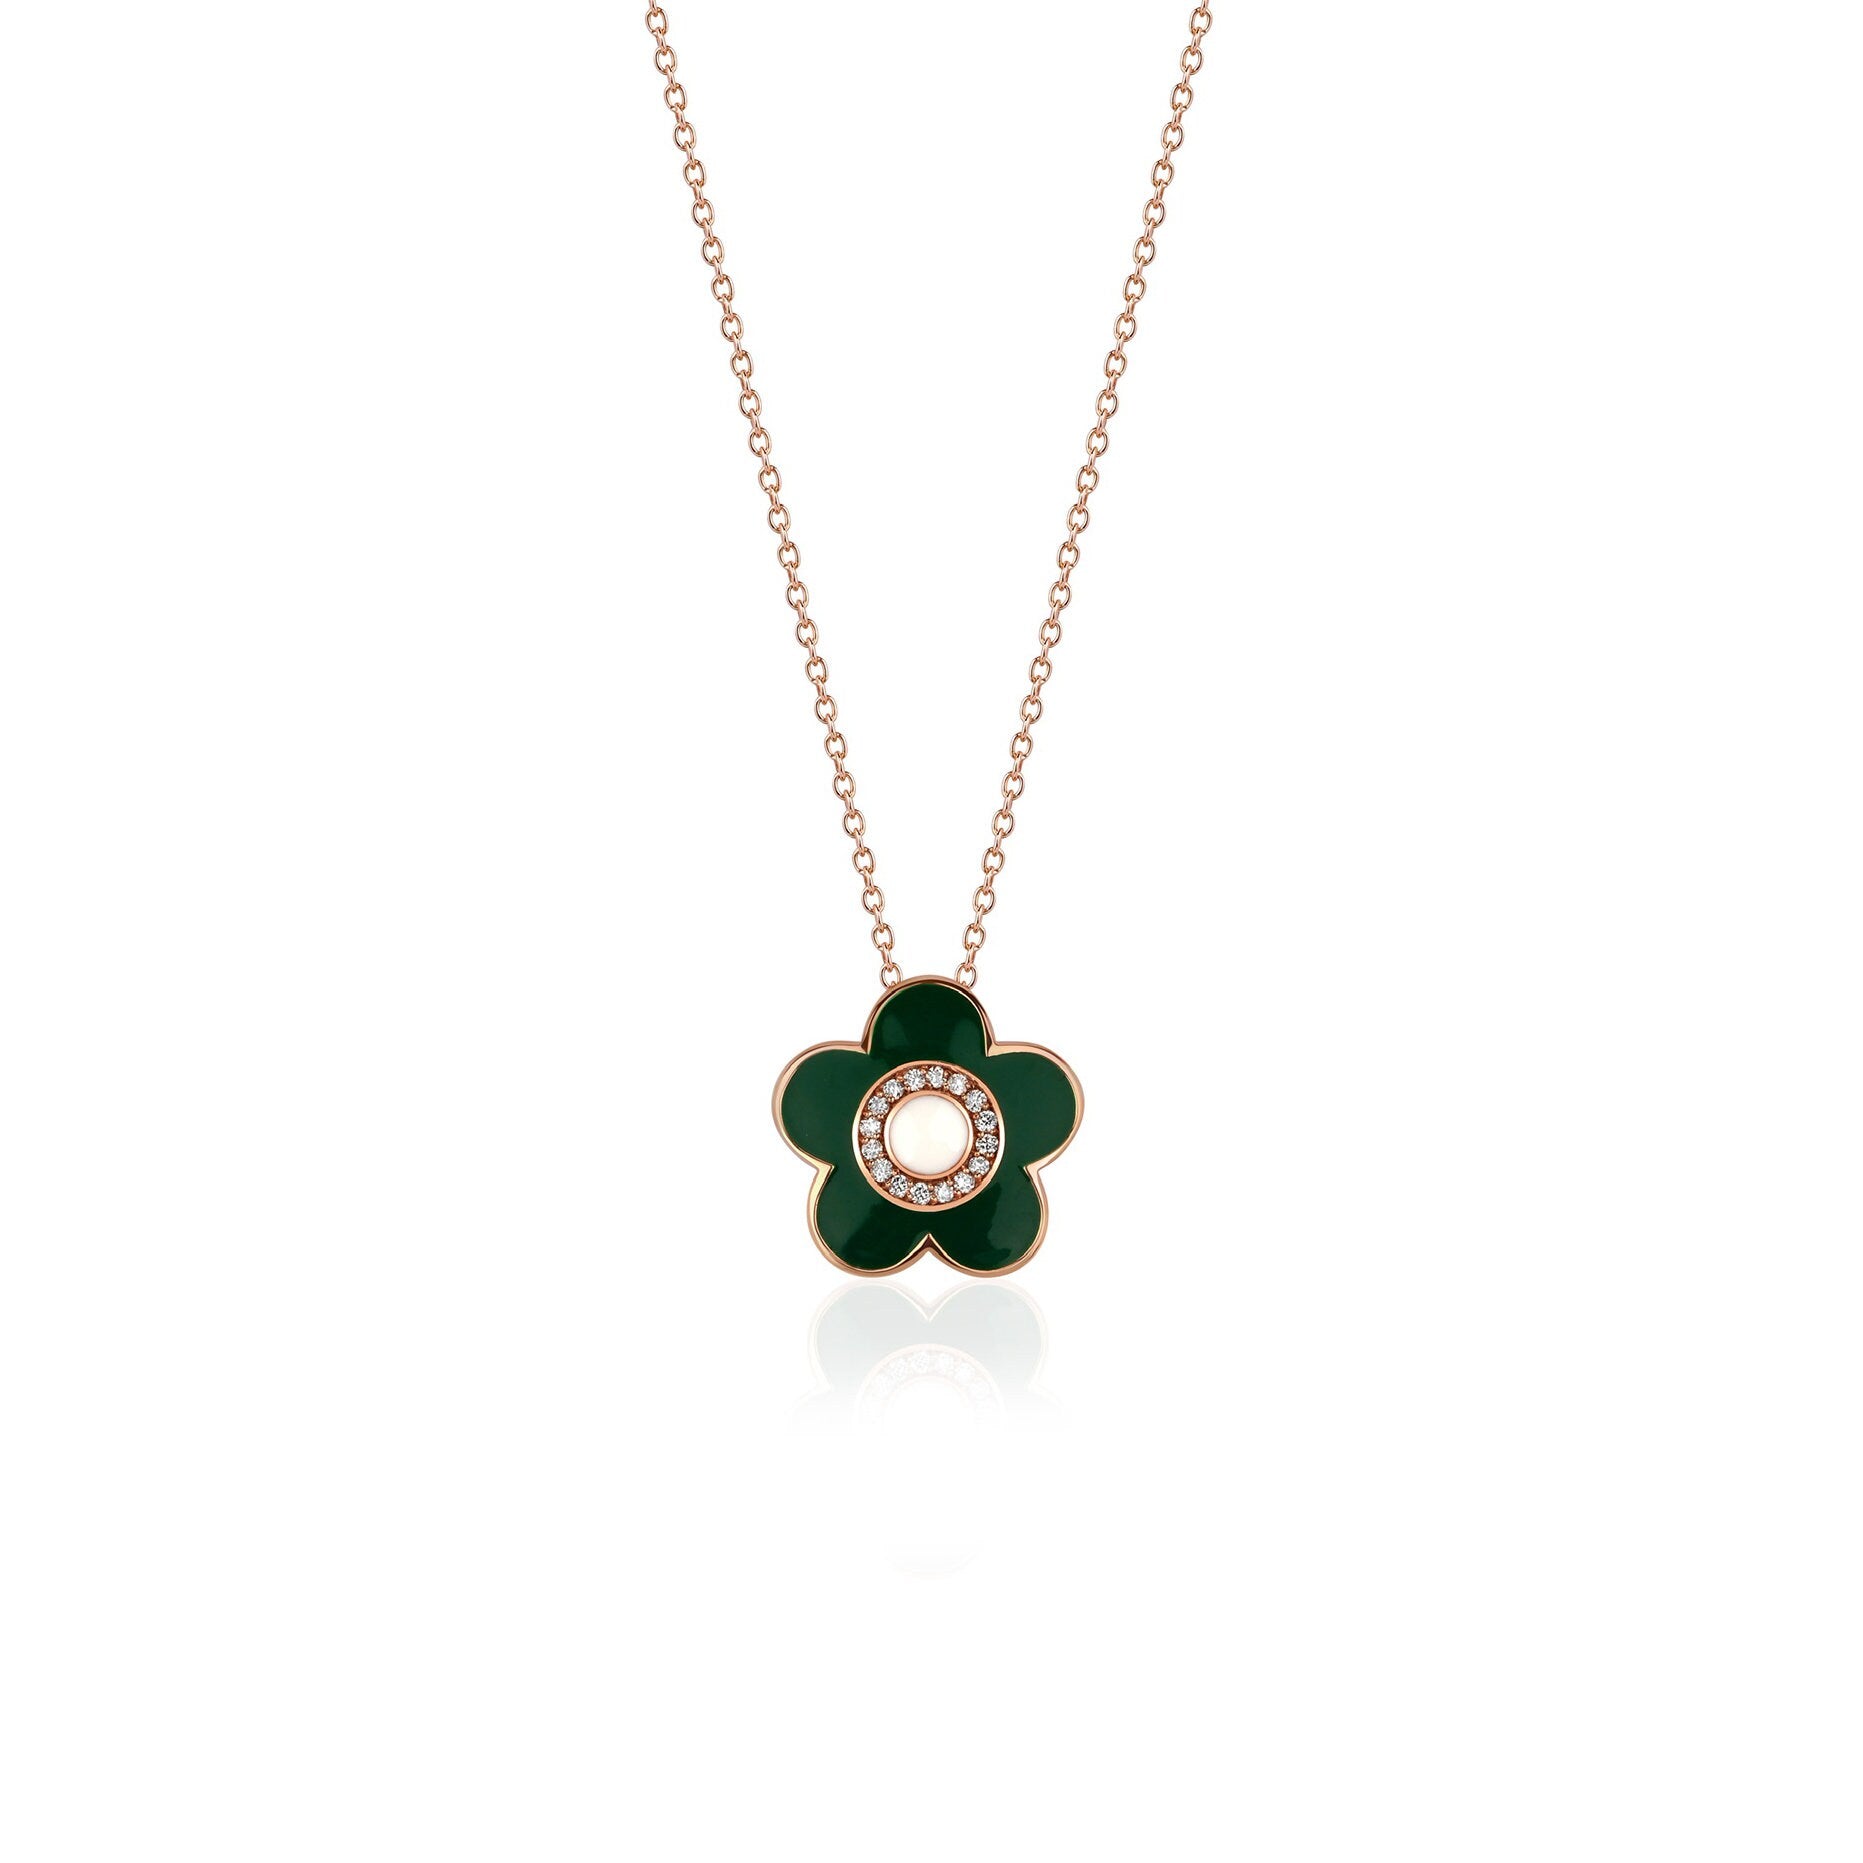 Authentic Diamond Flower Necklace in 14K/18K Gold